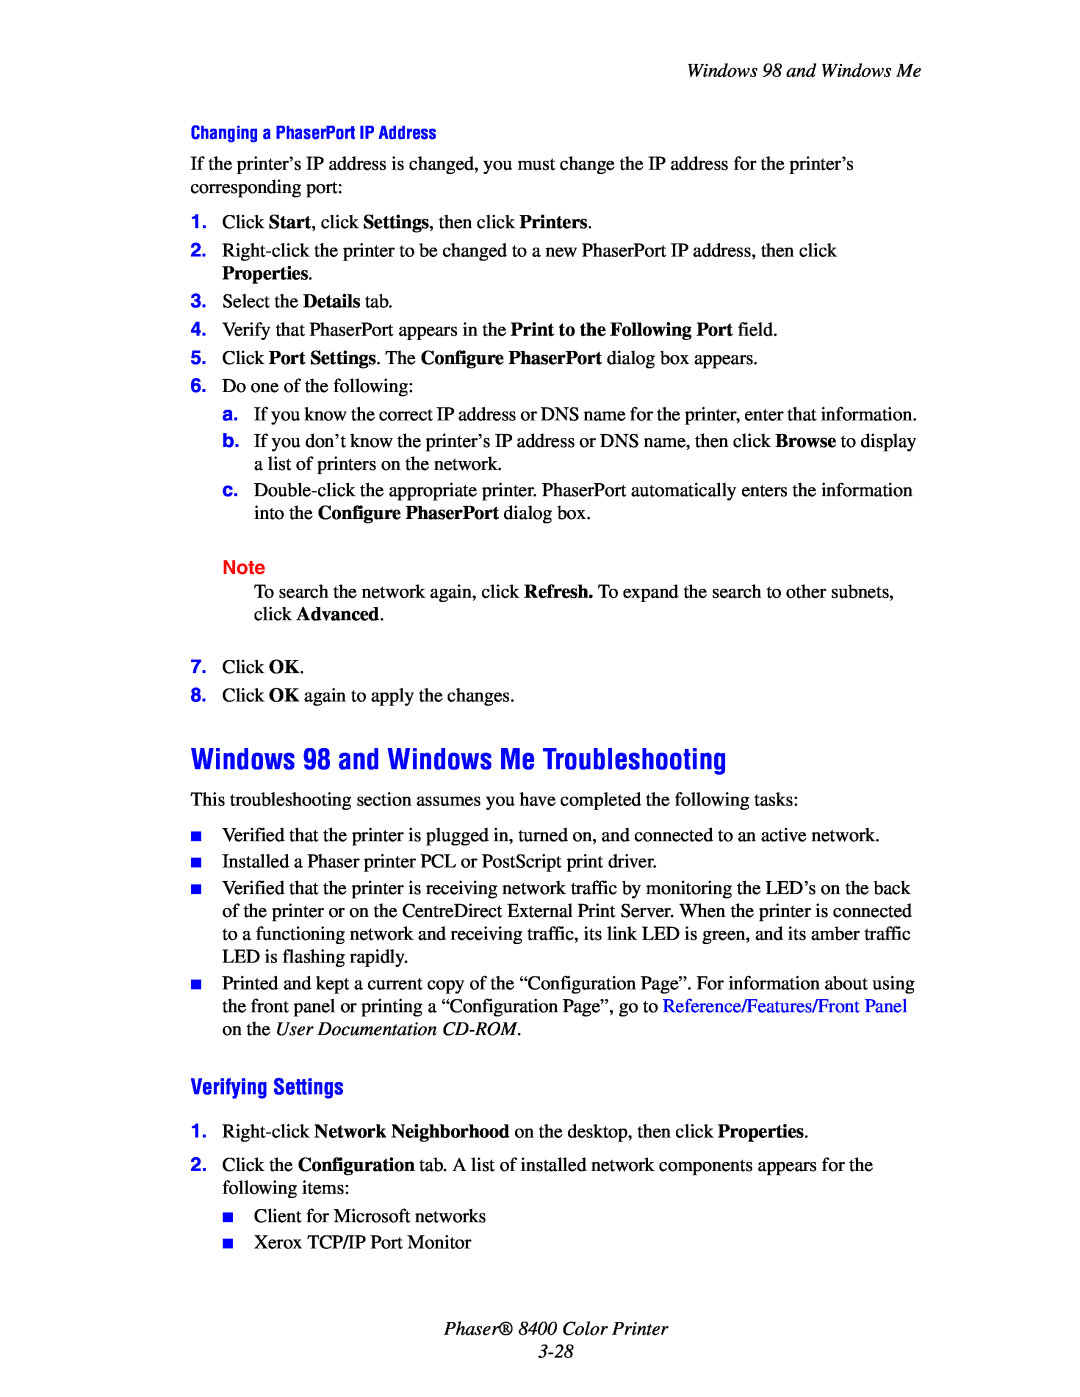 Xerox manual Windows 98 and Windows Me Troubleshooting, Verifying Settings, Phaser 8400 Color Printer 